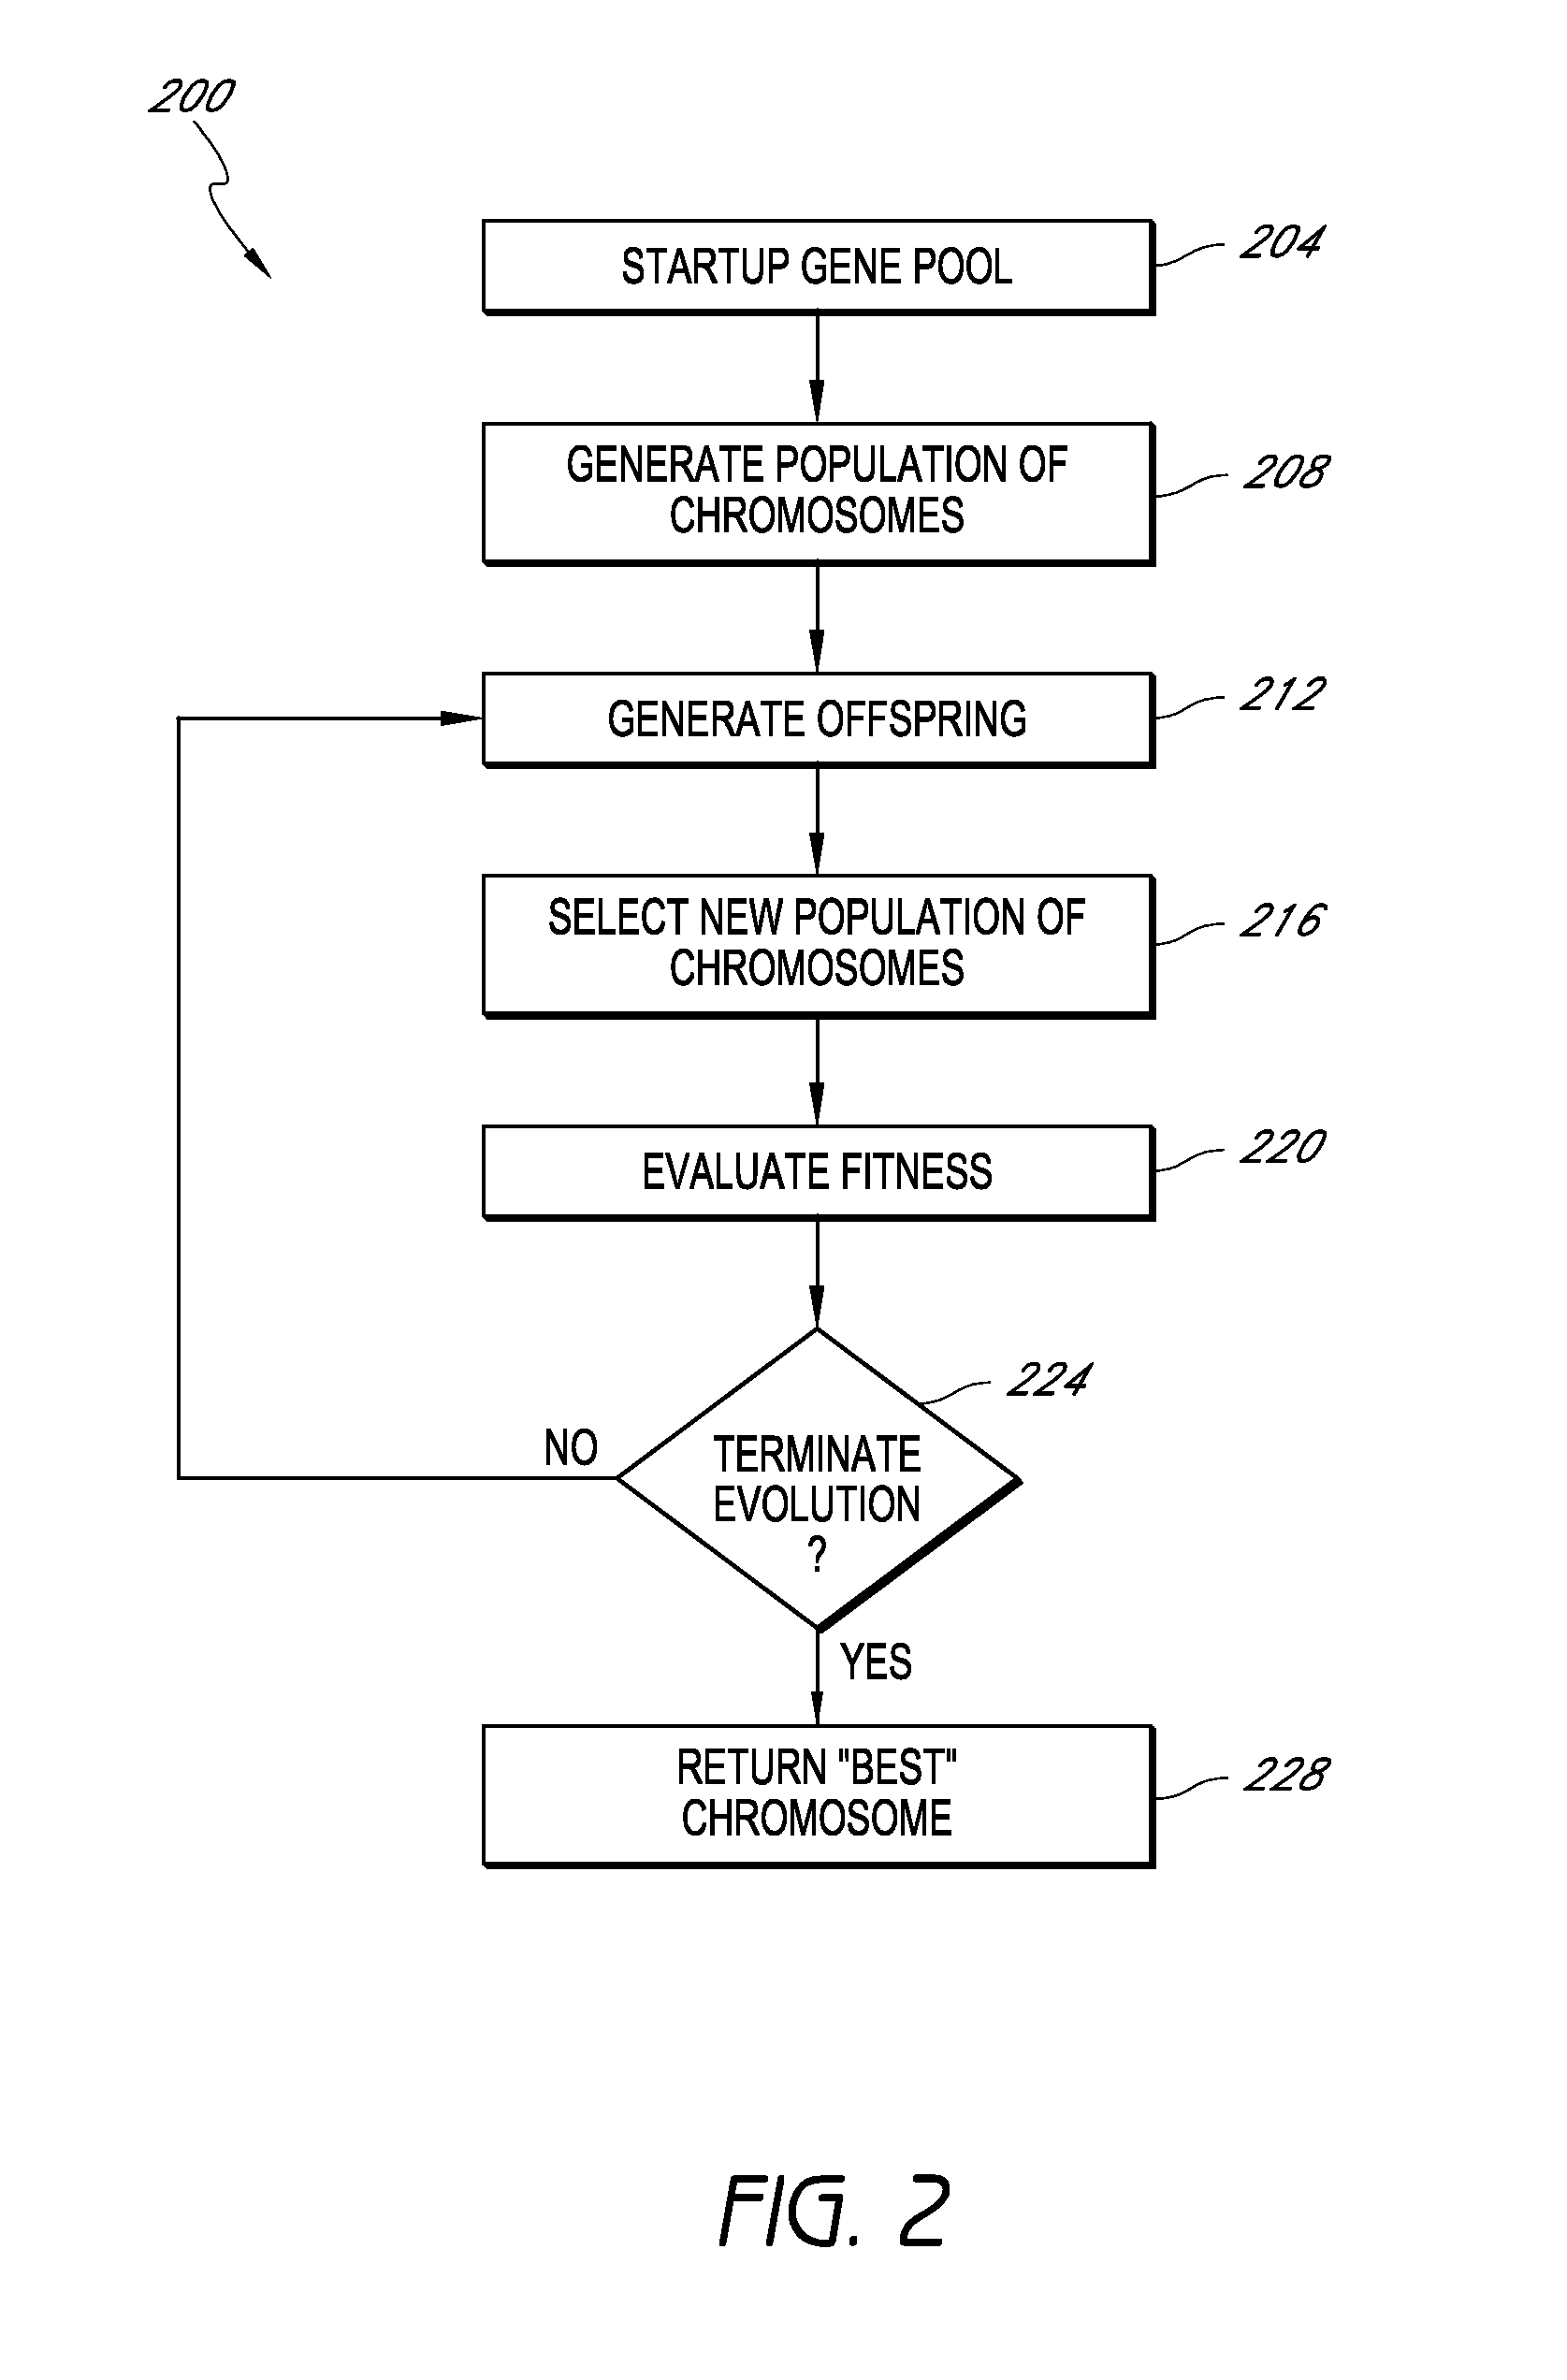 Systems and methods for index selection in collections of data